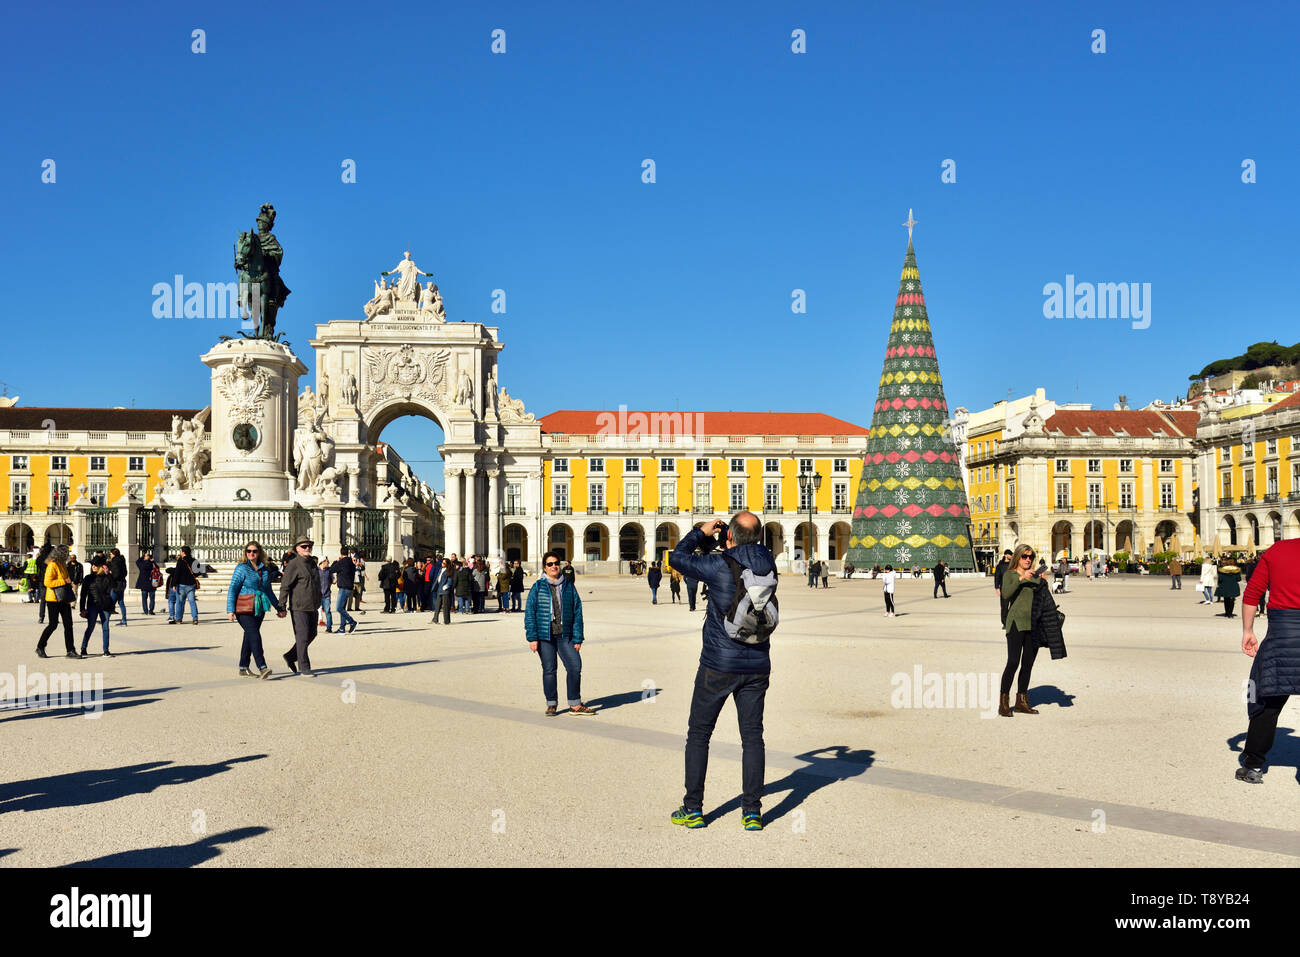 Terreiro do Paco (Praca do Comercio) with the traditional Christmas Tree, one of the centers of the historic city facing the Tagus river. Lisbon, Port Stock Photo